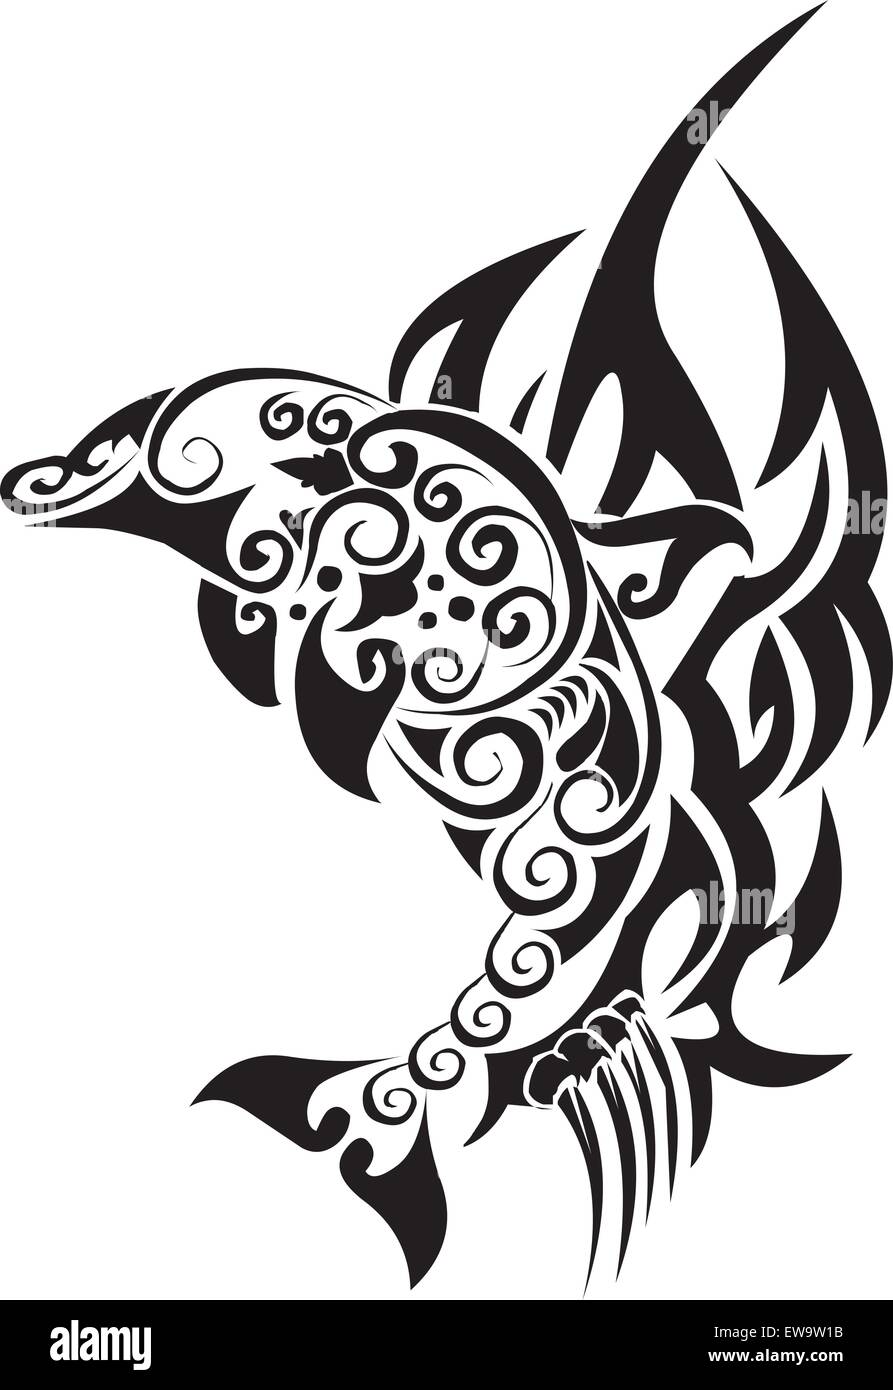 Dolphin Tattoo Posters for Sale | Redbubble